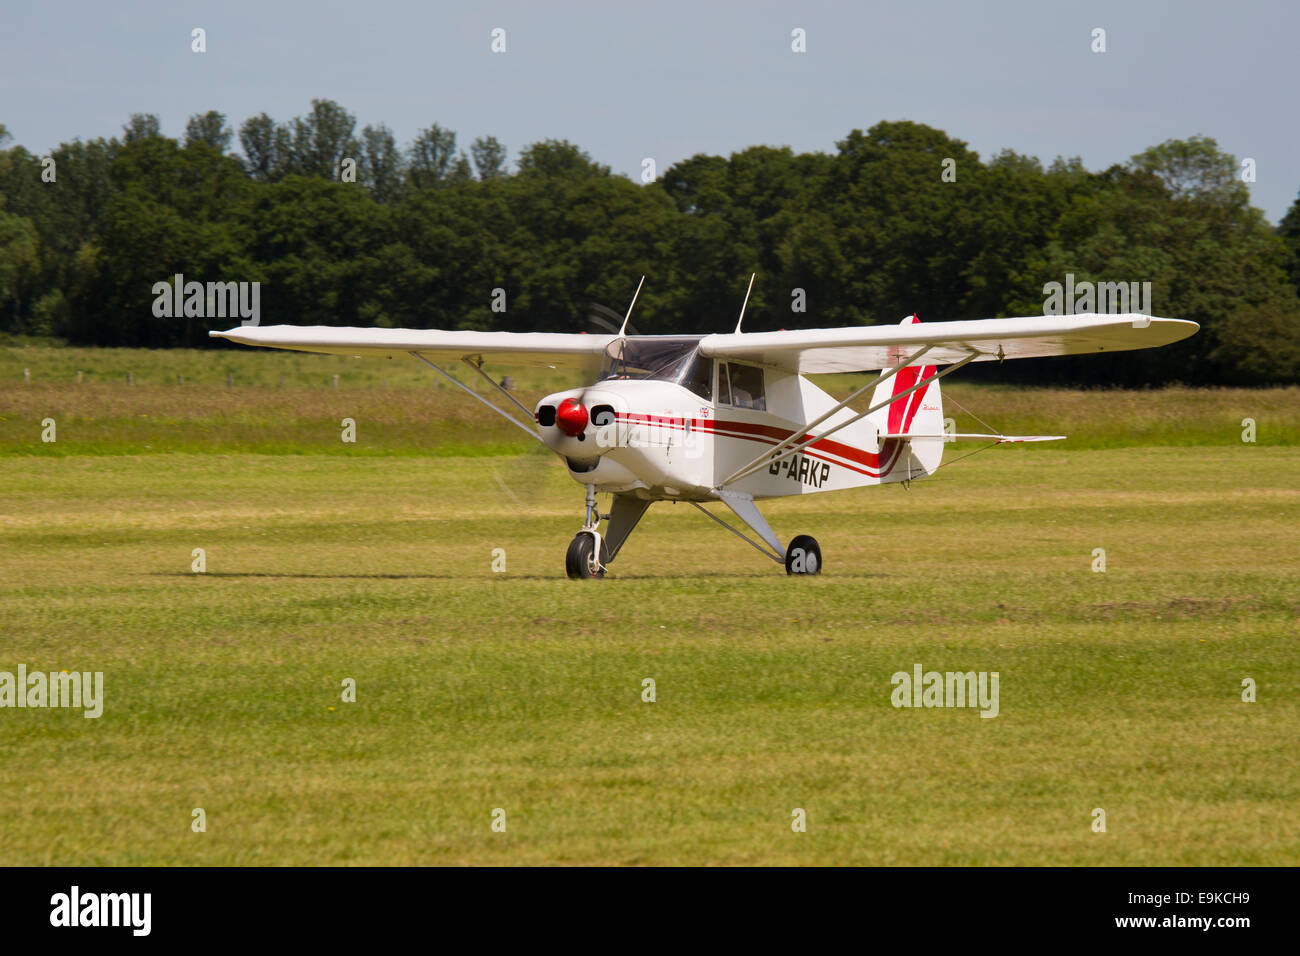 Piper PA-22-160 Colt G-ARKP taking-off from grass runway at Headcorn Airfield Stock Photo